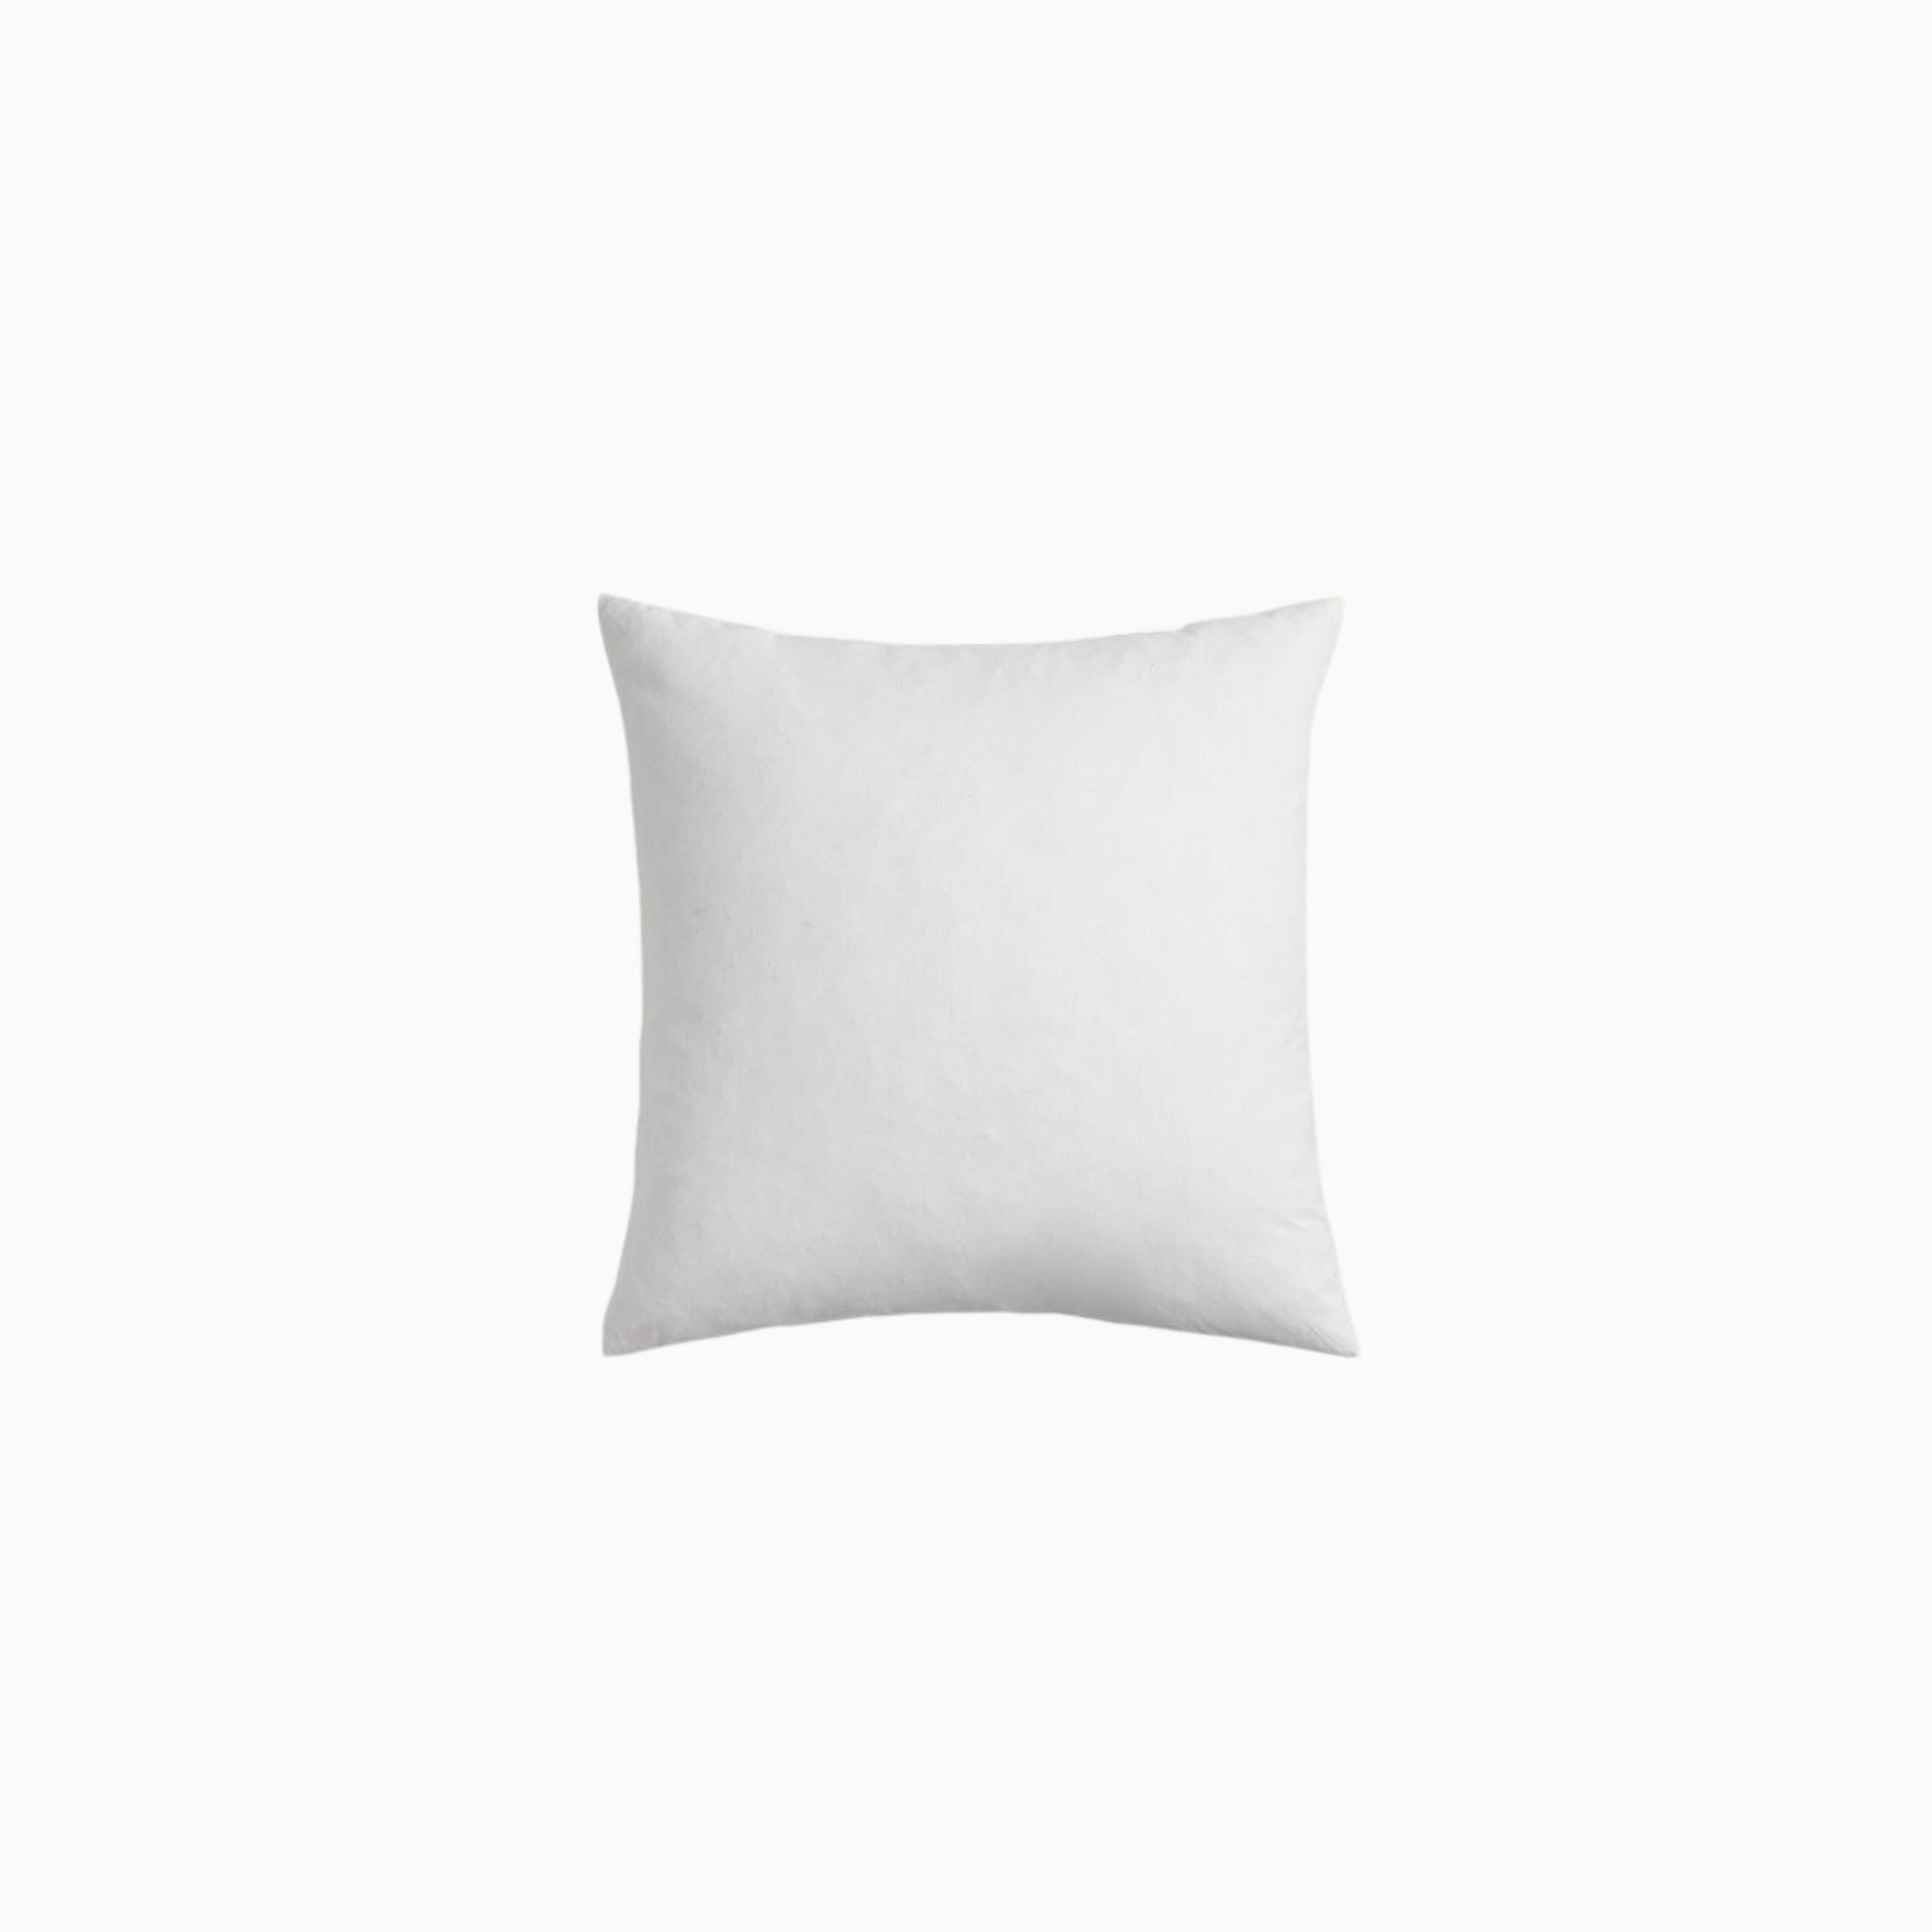 Pillow Insert 24x24 - Simply Elevated Home Furnishings 